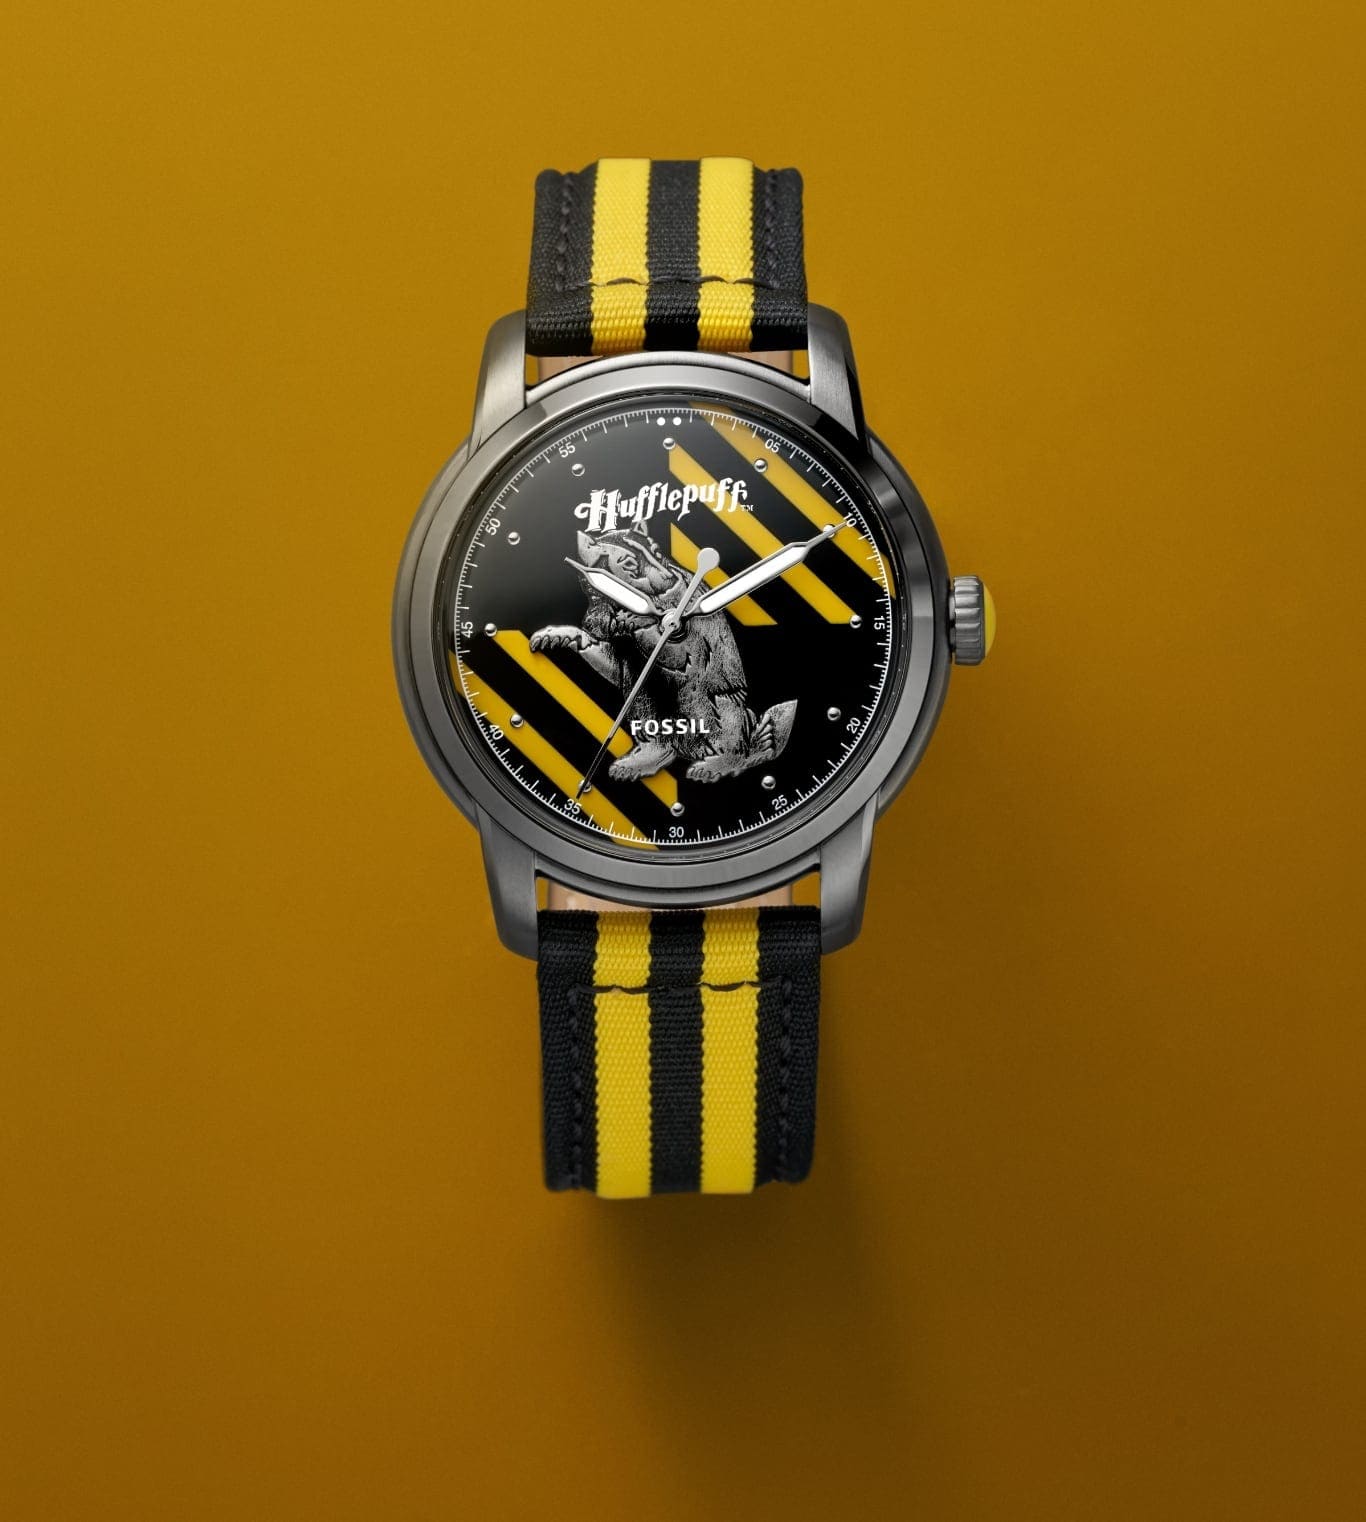 Silver-tone Hufflepuff house watch with a black and yellow strap.